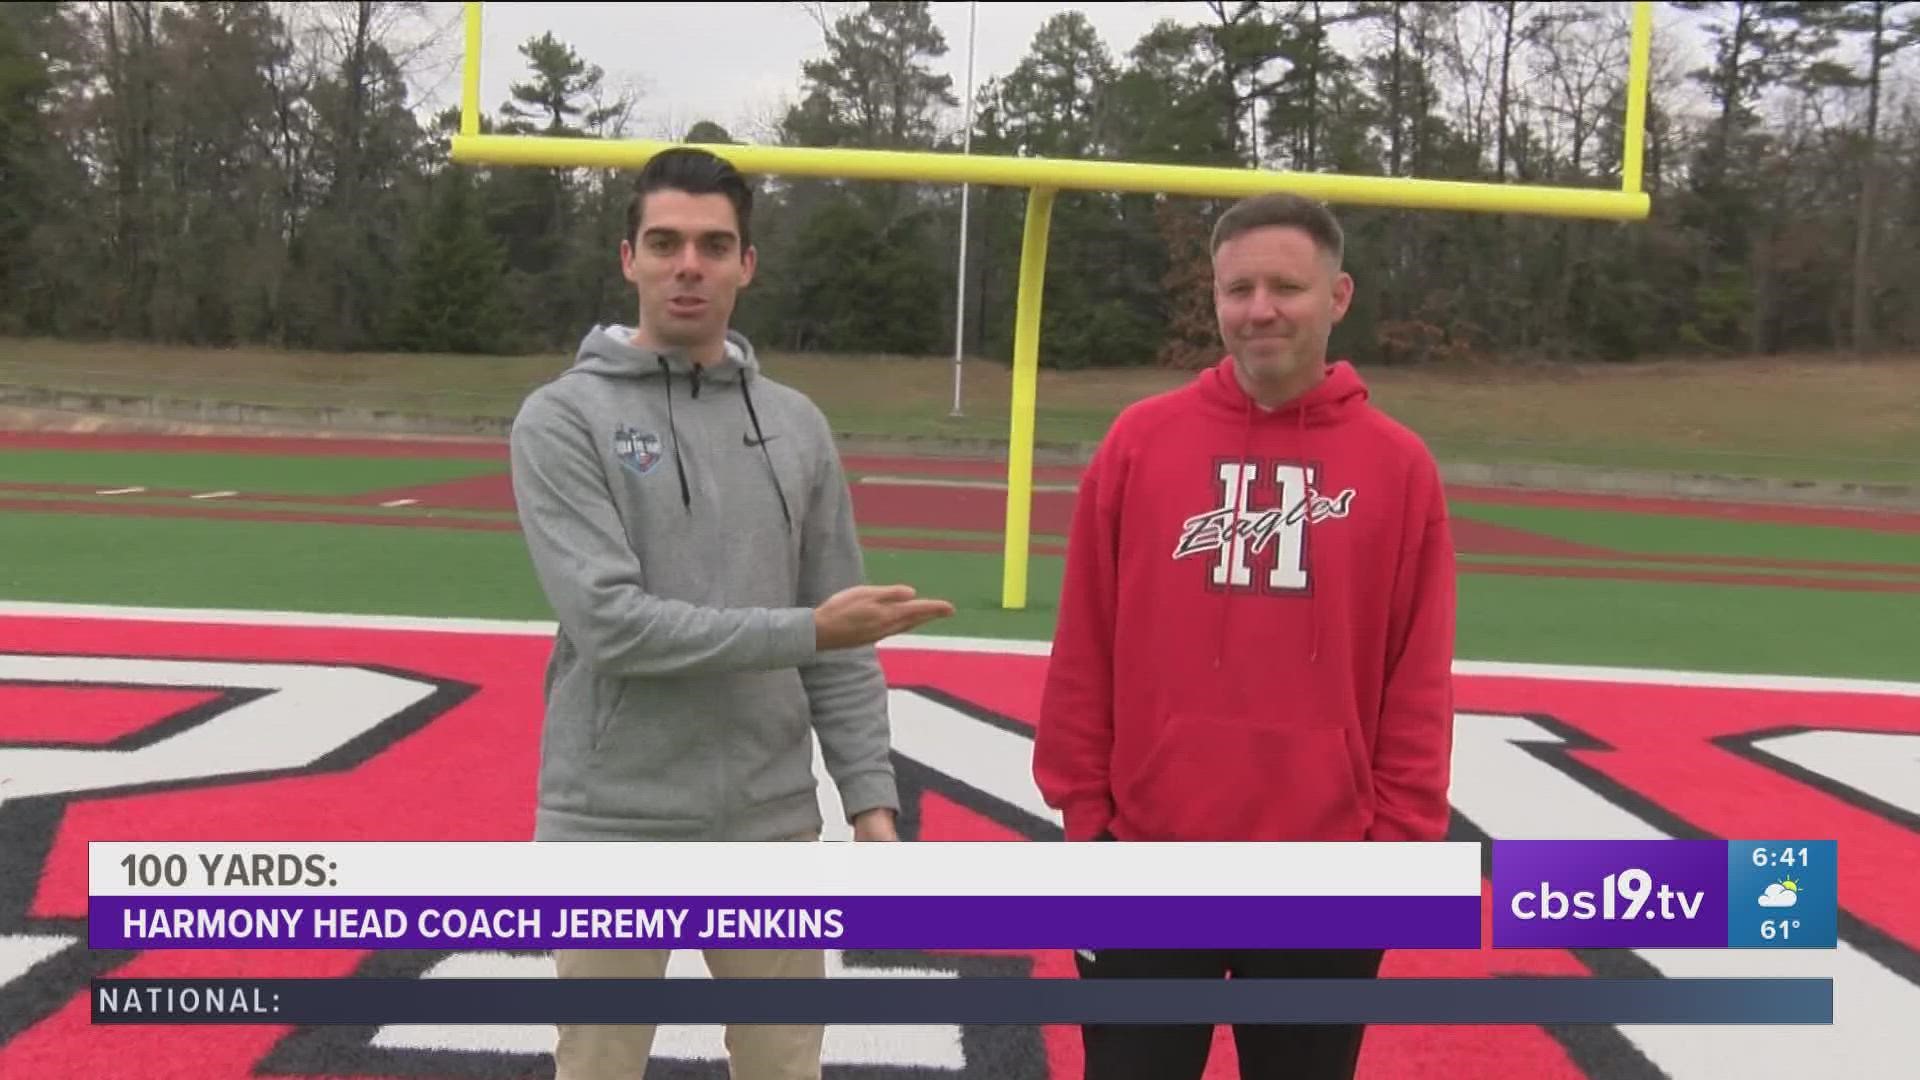 CBS19's Bryce Brauneisen caught up with Harmony's Coach Jeremy Jenkins to talk about the team's incredible state semifinal run.